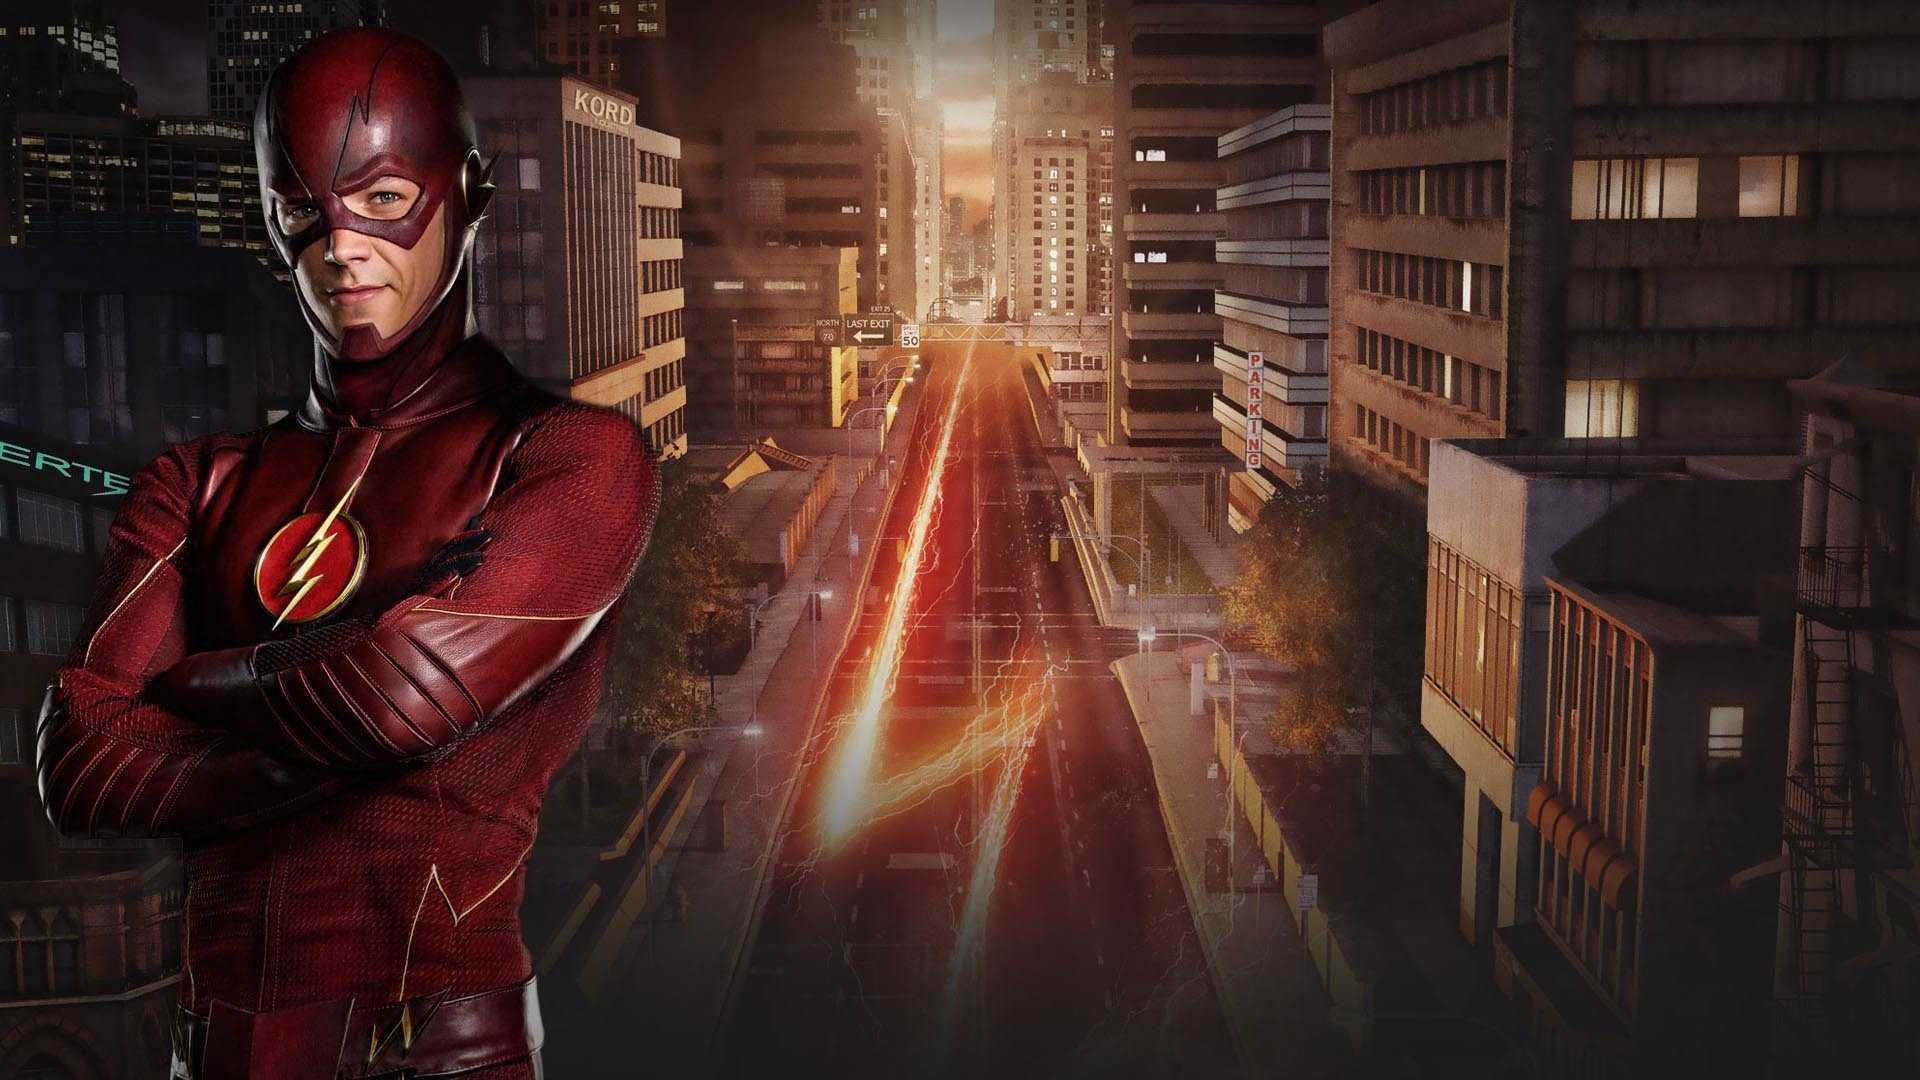 The Flash Wallpapers, HD Desktop images